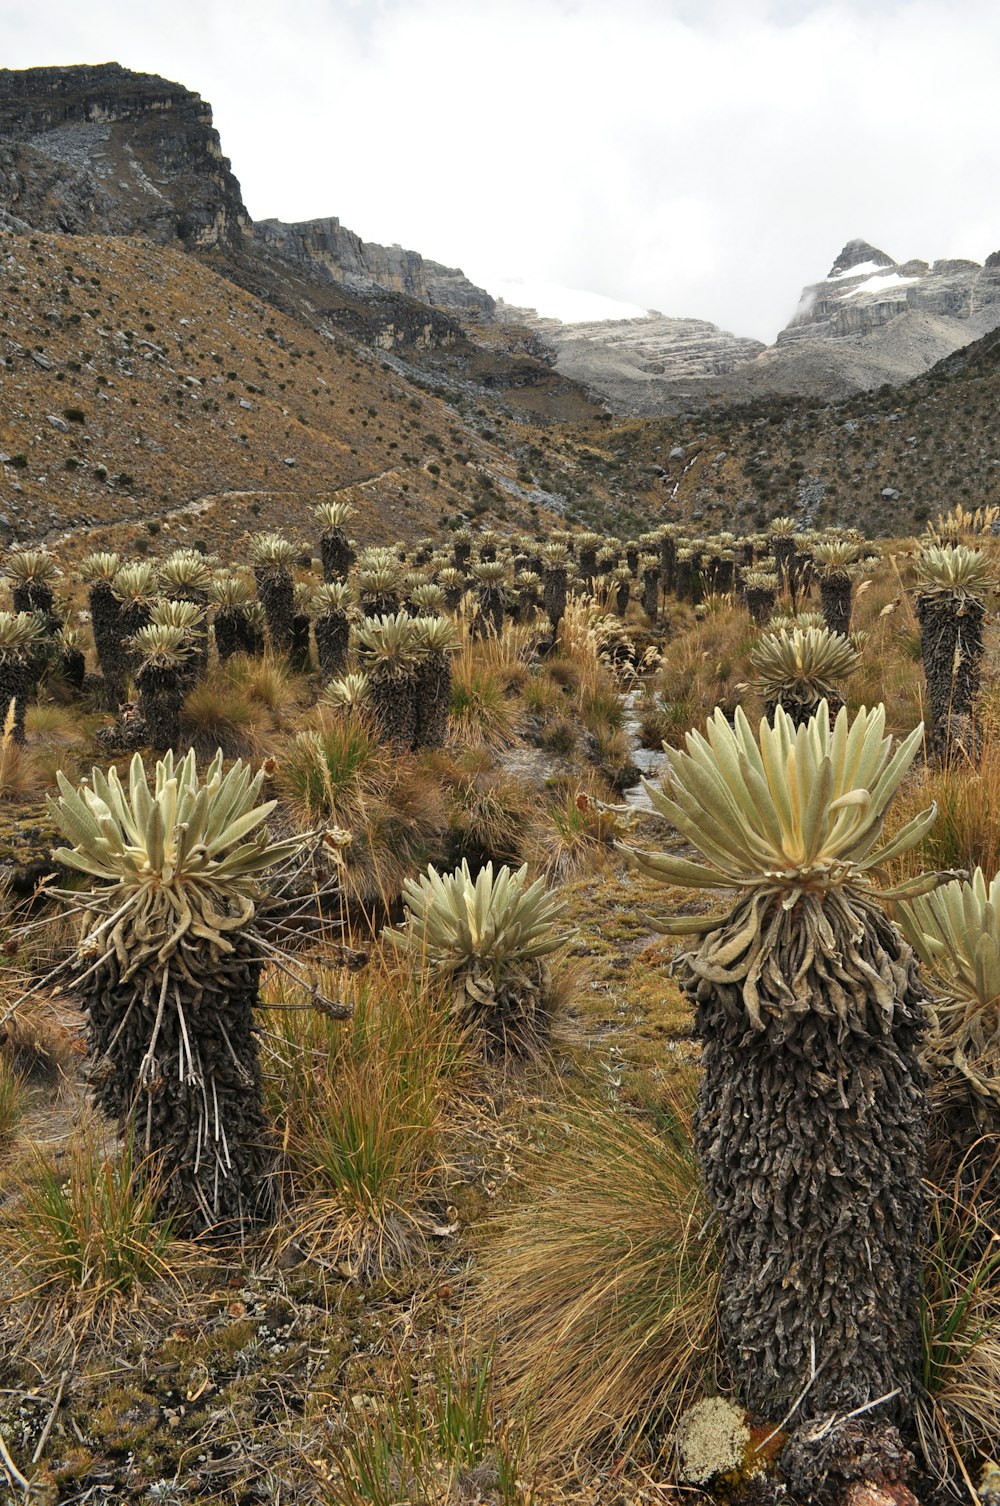 a large group of cactus plants in the desert